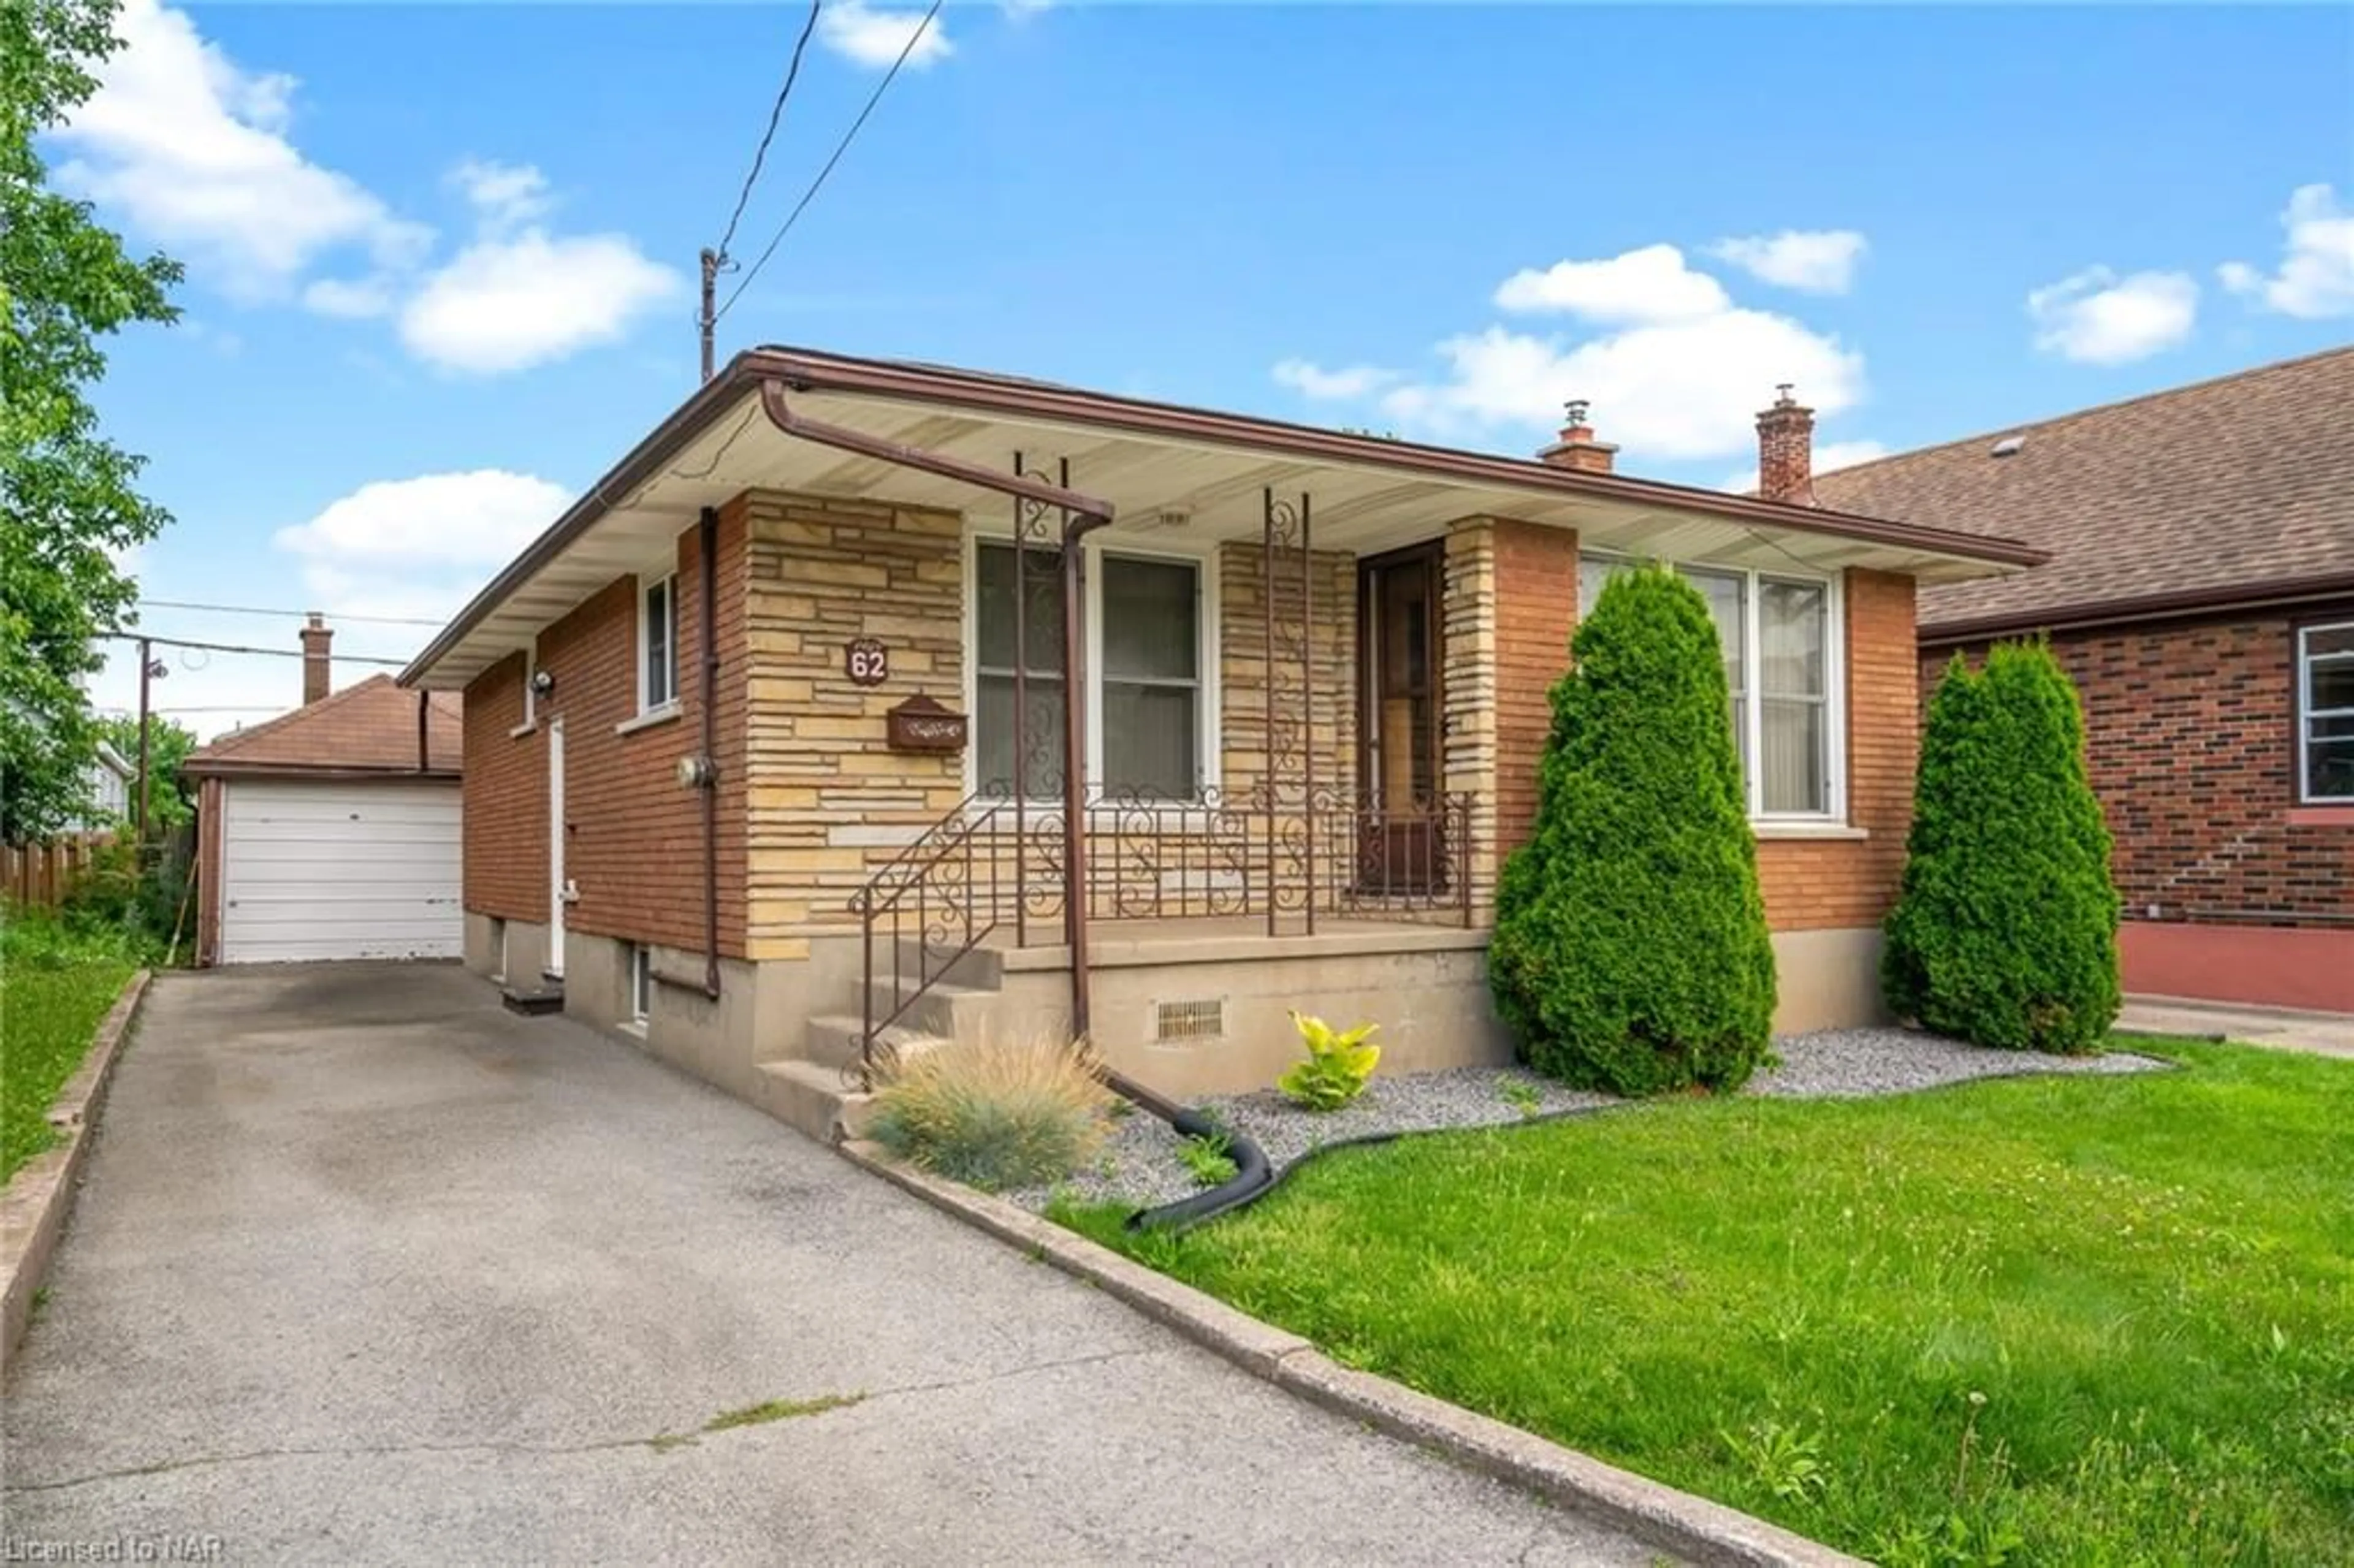 Home with brick exterior material for 62 St George St, St. Catharines Ontario L2M 5P6